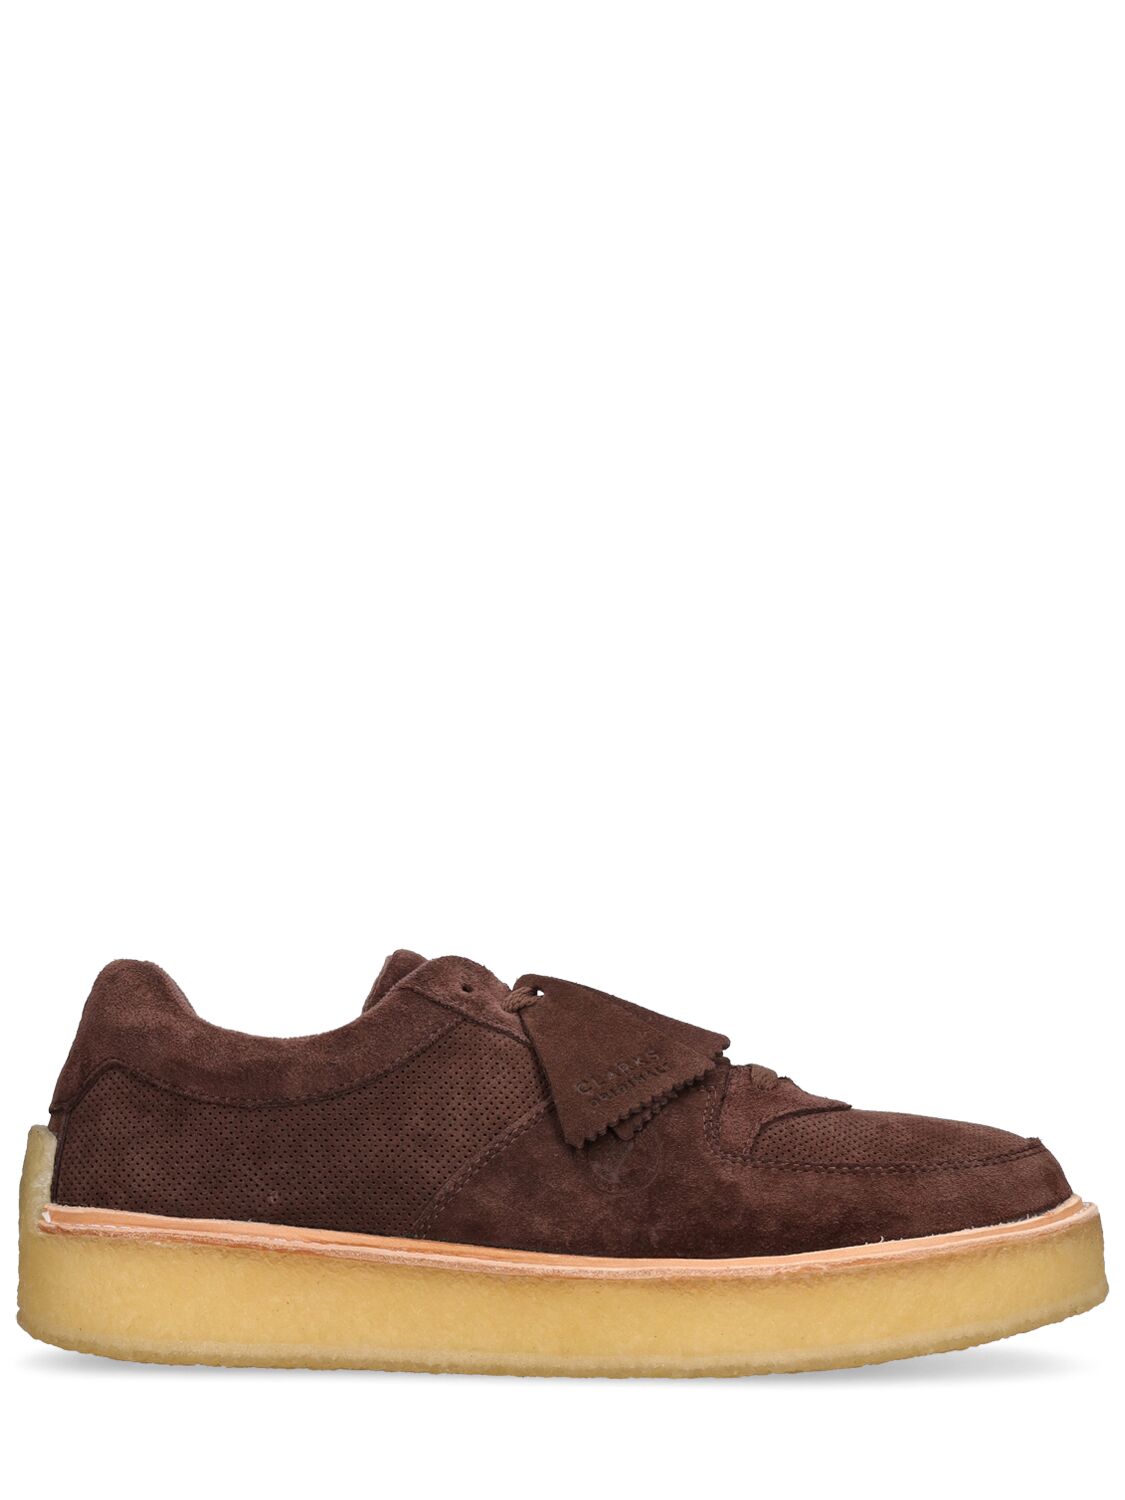 Sandford Suede Lace-up Shoes